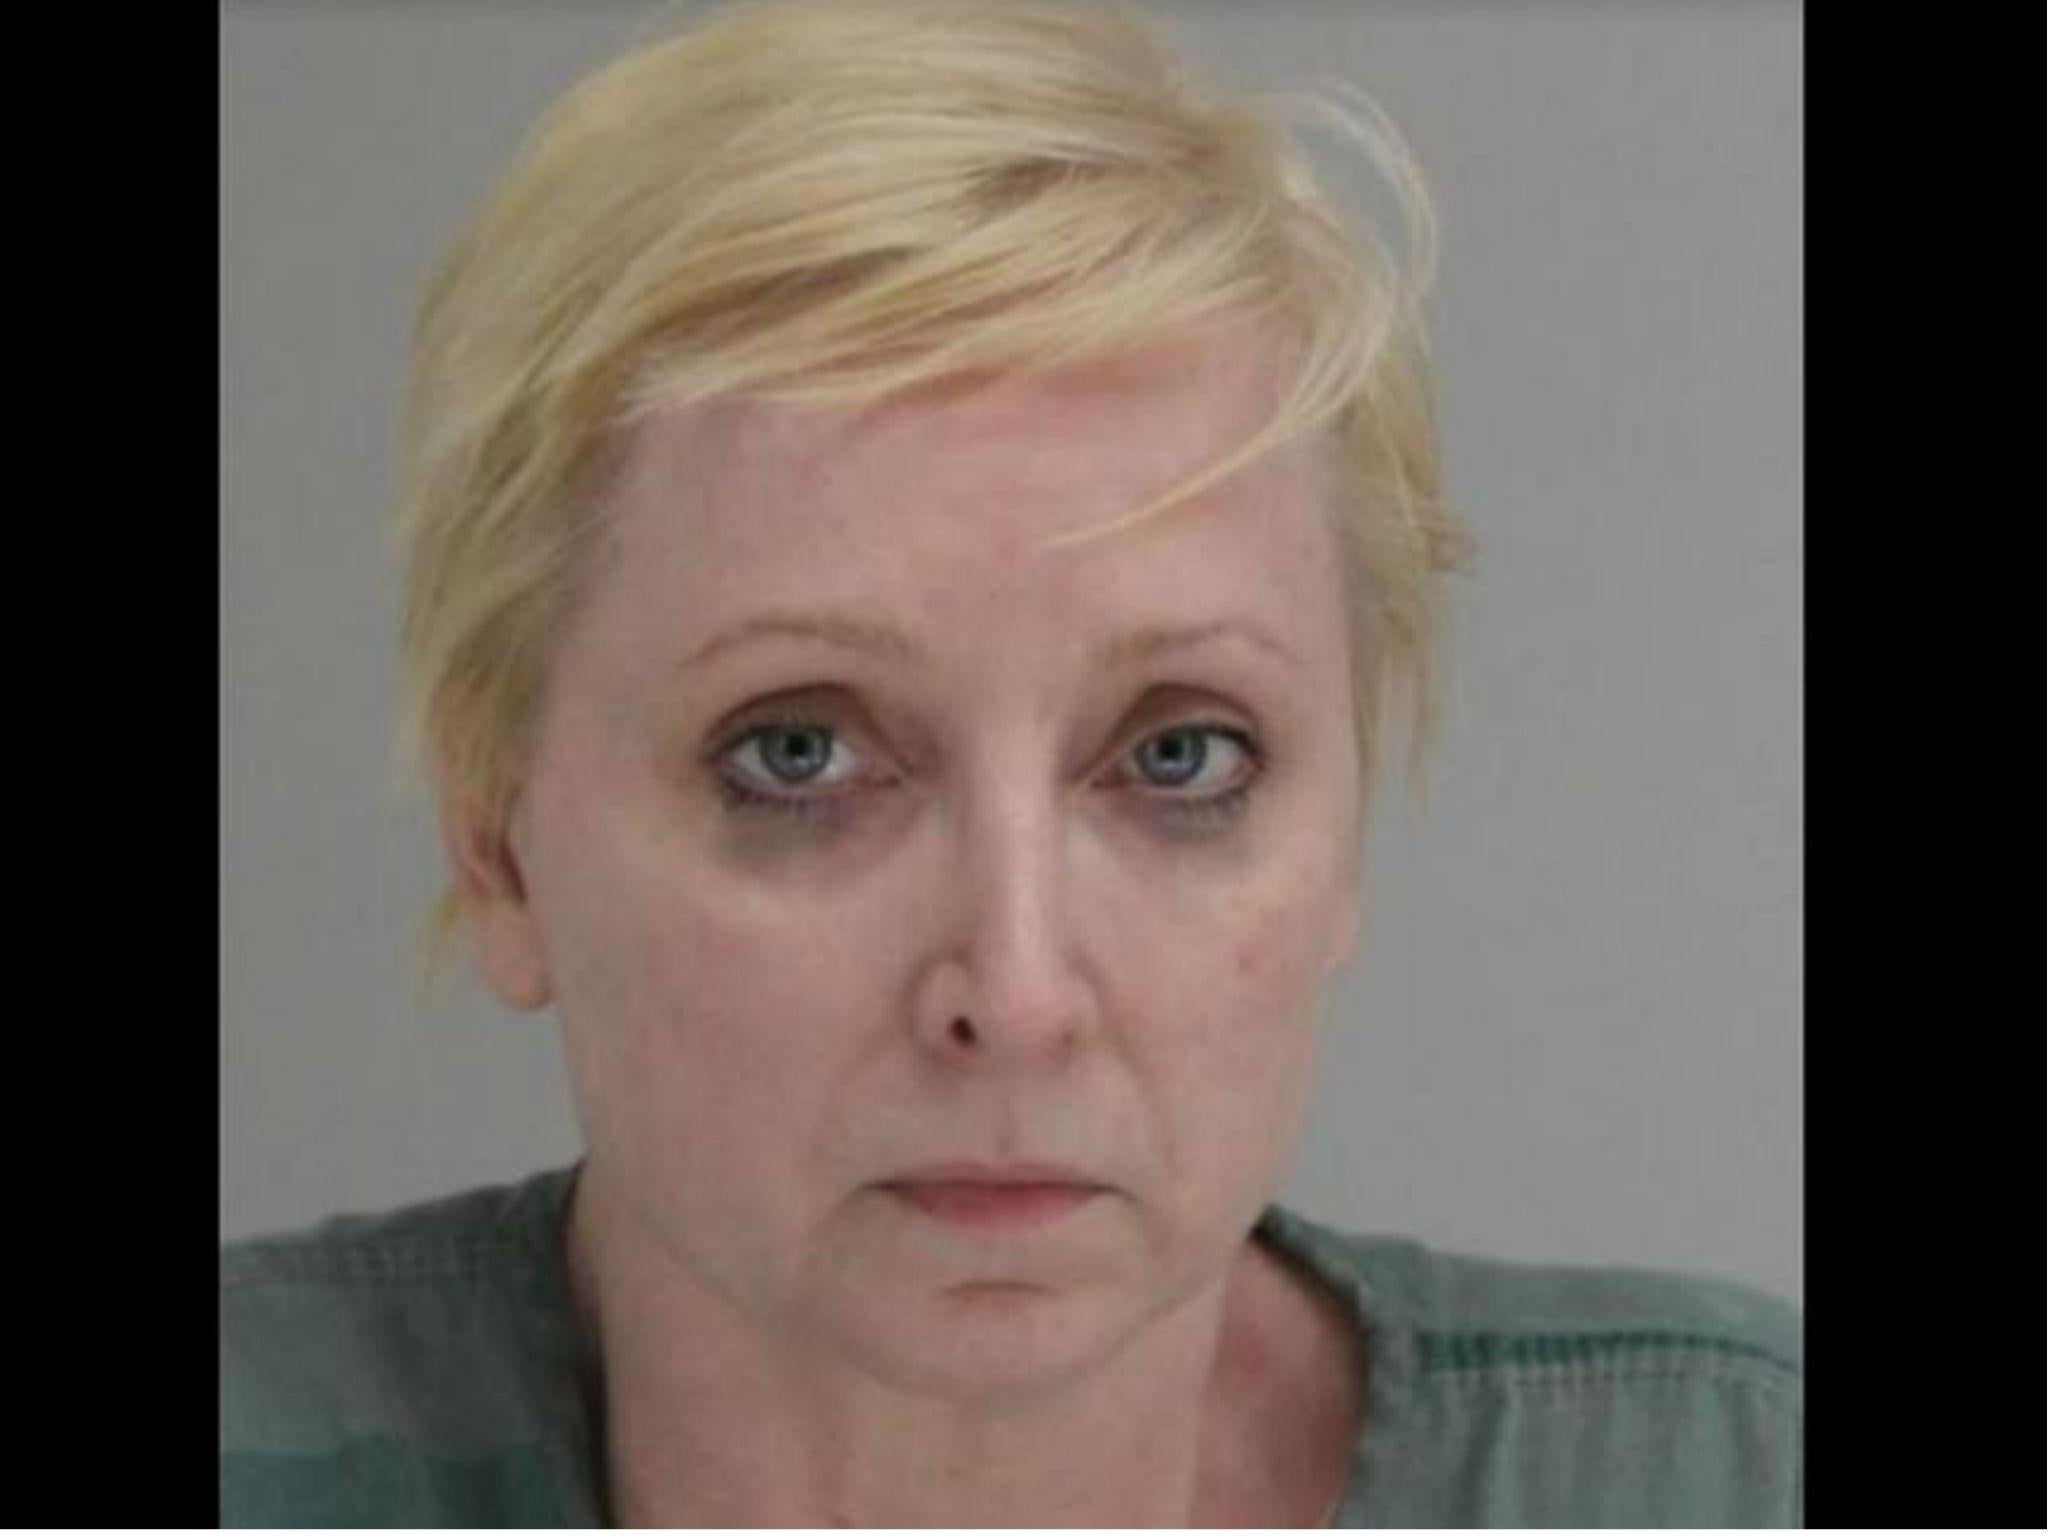 Police say Ms Harrison admitted to shooting her husband